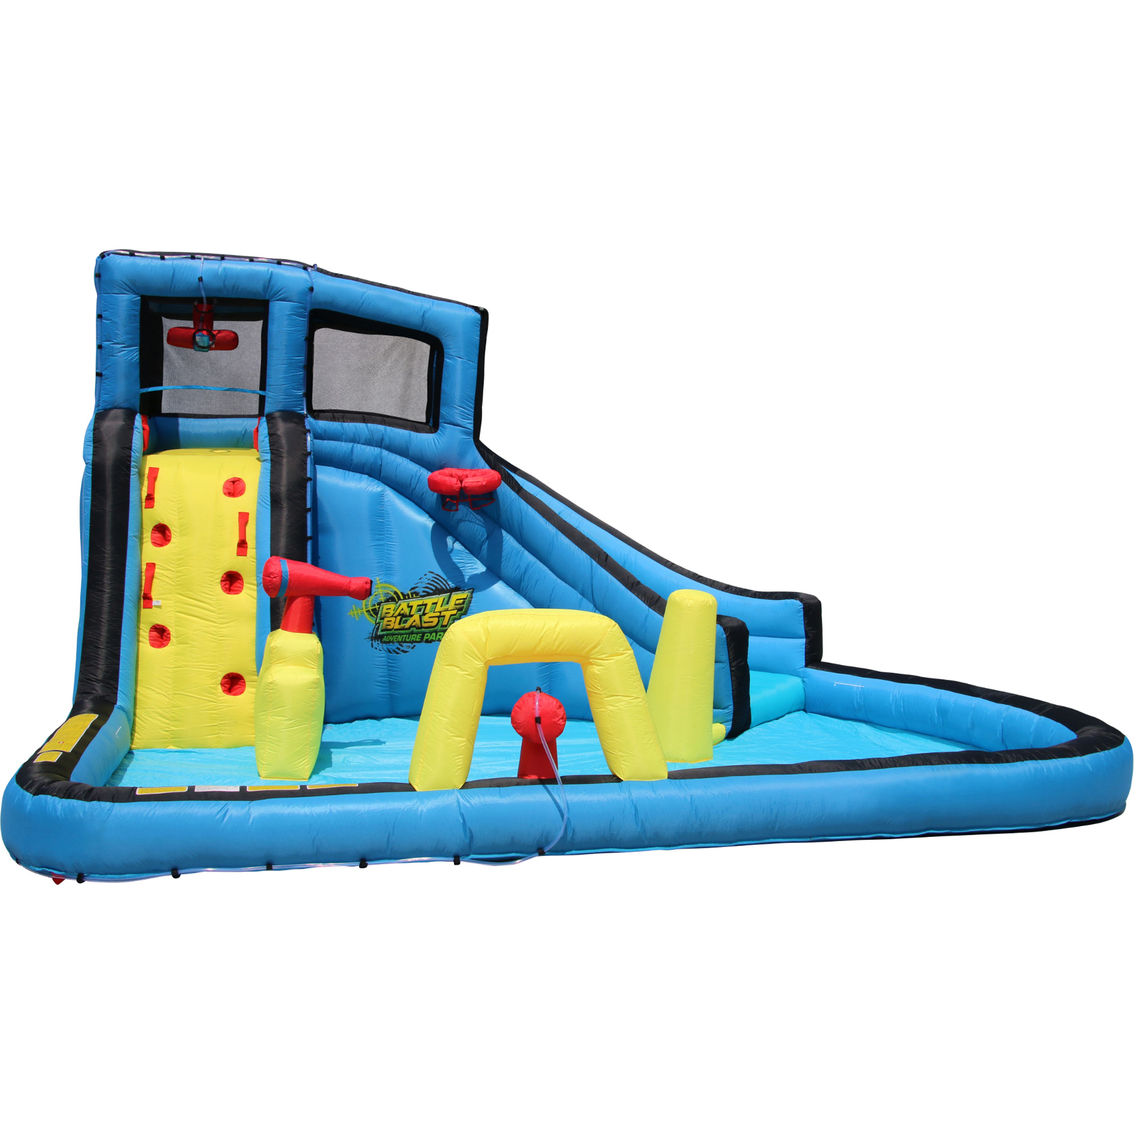 Banzai Battle Blast Inflatable Water Park Play Center - Image 2 of 9